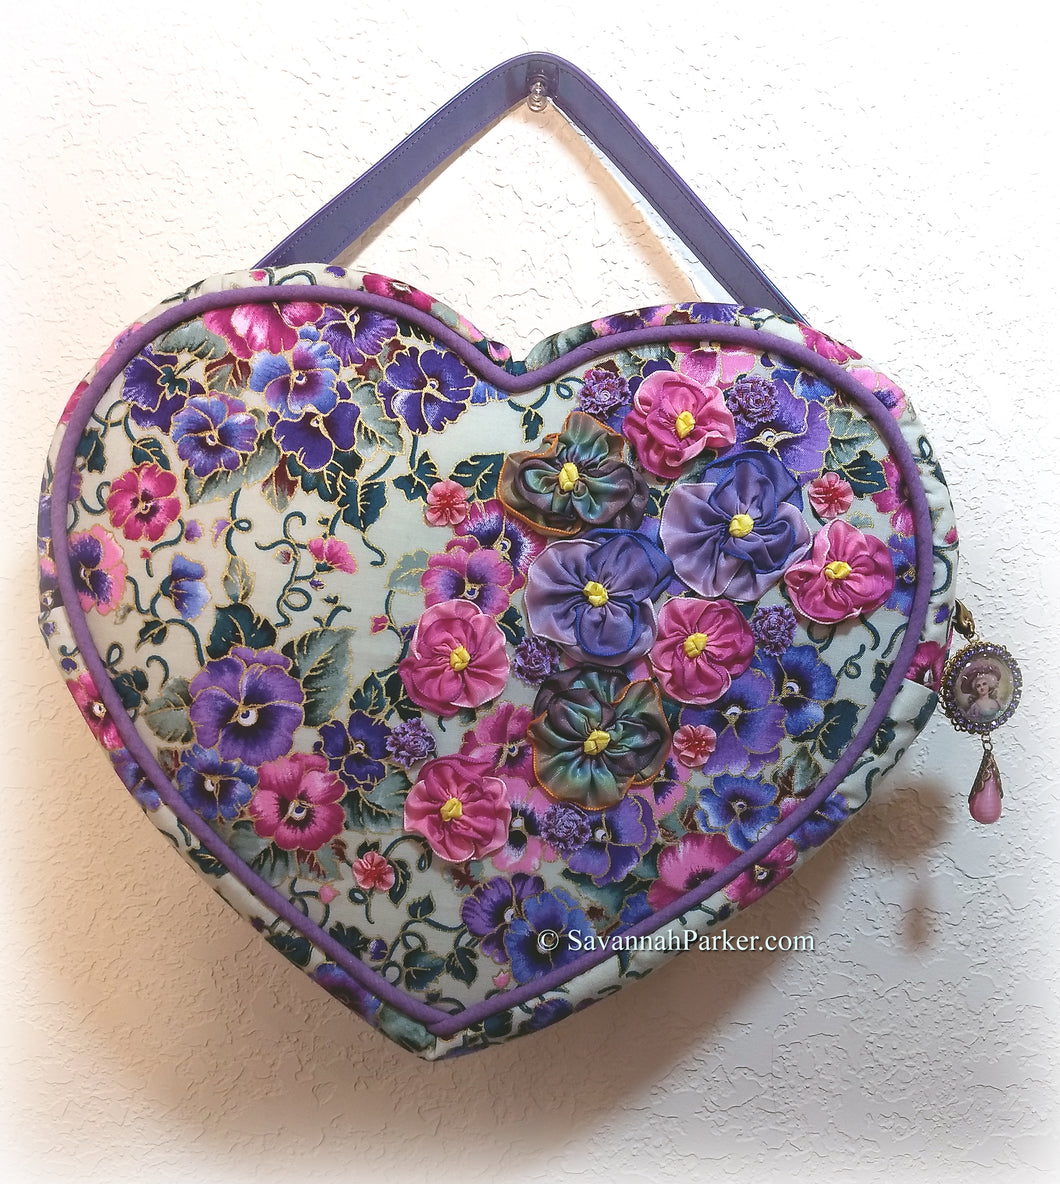 SOLD Exquisite Ribbonwork Pansies Pink and Purple Heart Shaped Purse Handbag, Handsewn Piping and Binding, Jeweled Detachable Strap, Jewel Charms